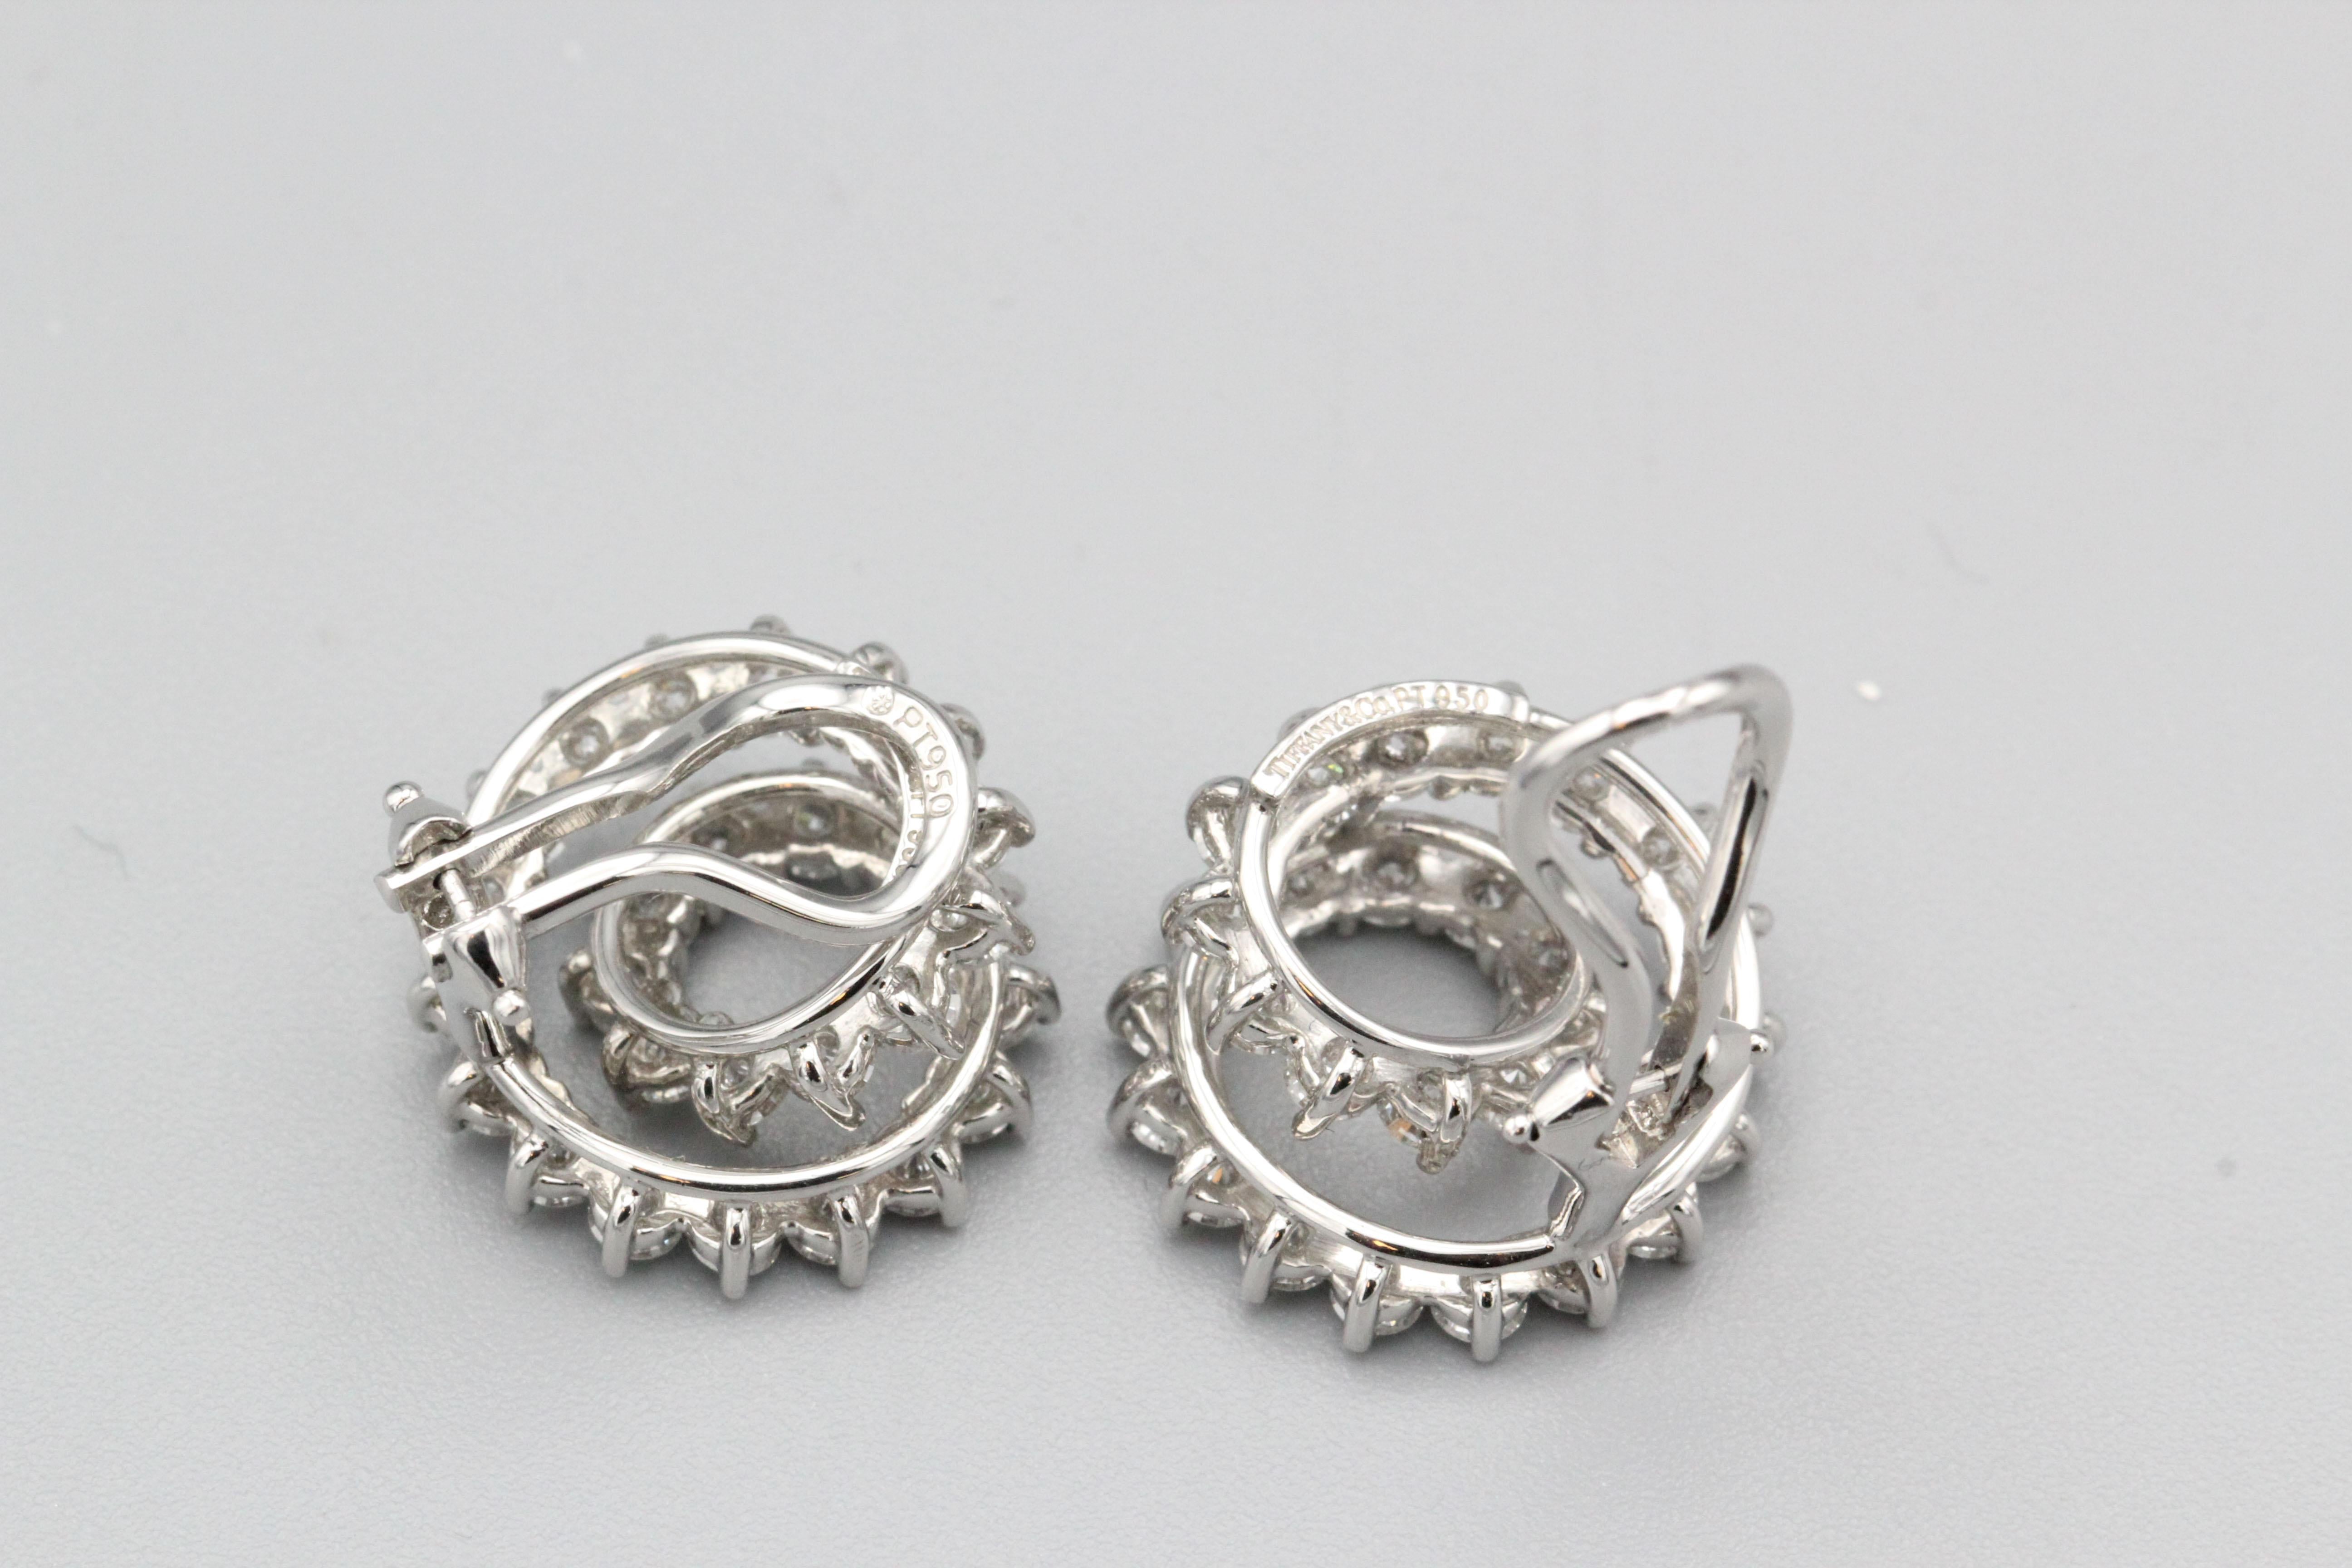 Tiffany & Co. Diamond and Platinum Swirl Earrings In Good Condition For Sale In New York, NY